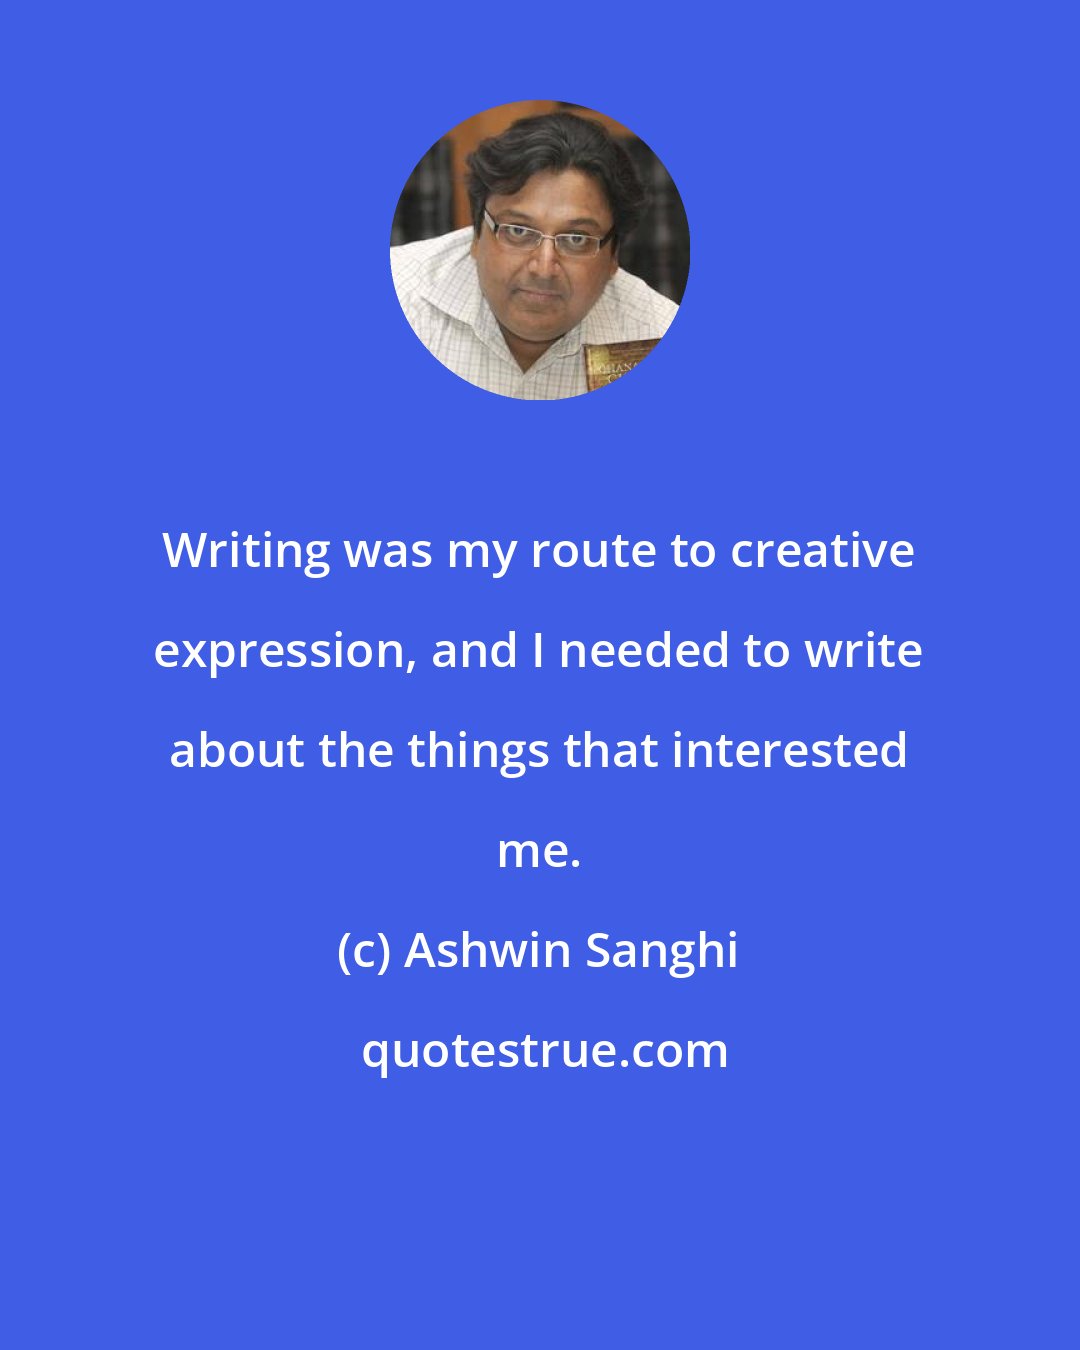 Ashwin Sanghi: Writing was my route to creative expression, and I needed to write about the things that interested me.